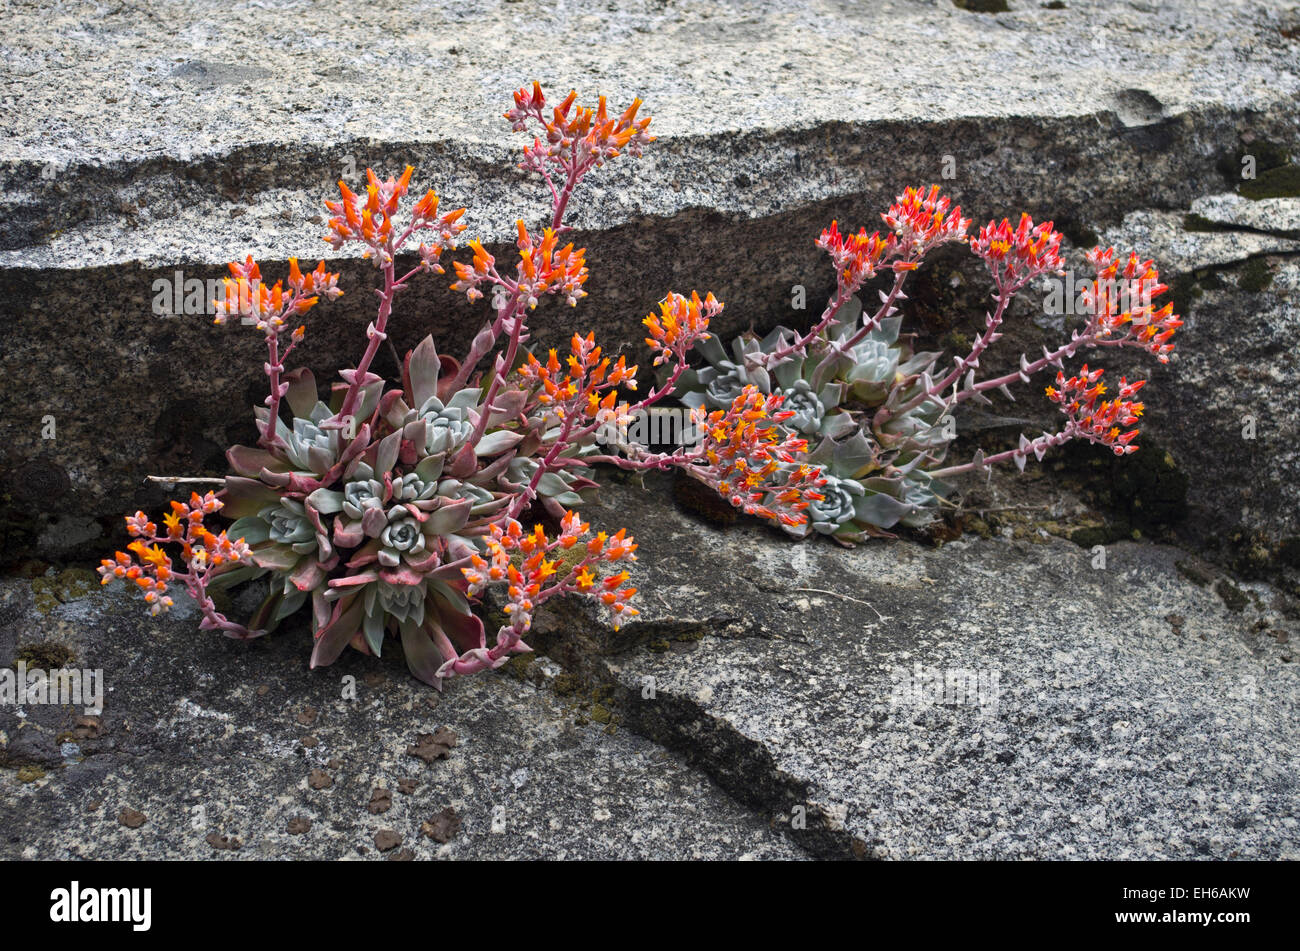 Canyon Live-forever, a succulent, along the High Sierra Trail in Sequoia National Park, California. Stock Photo